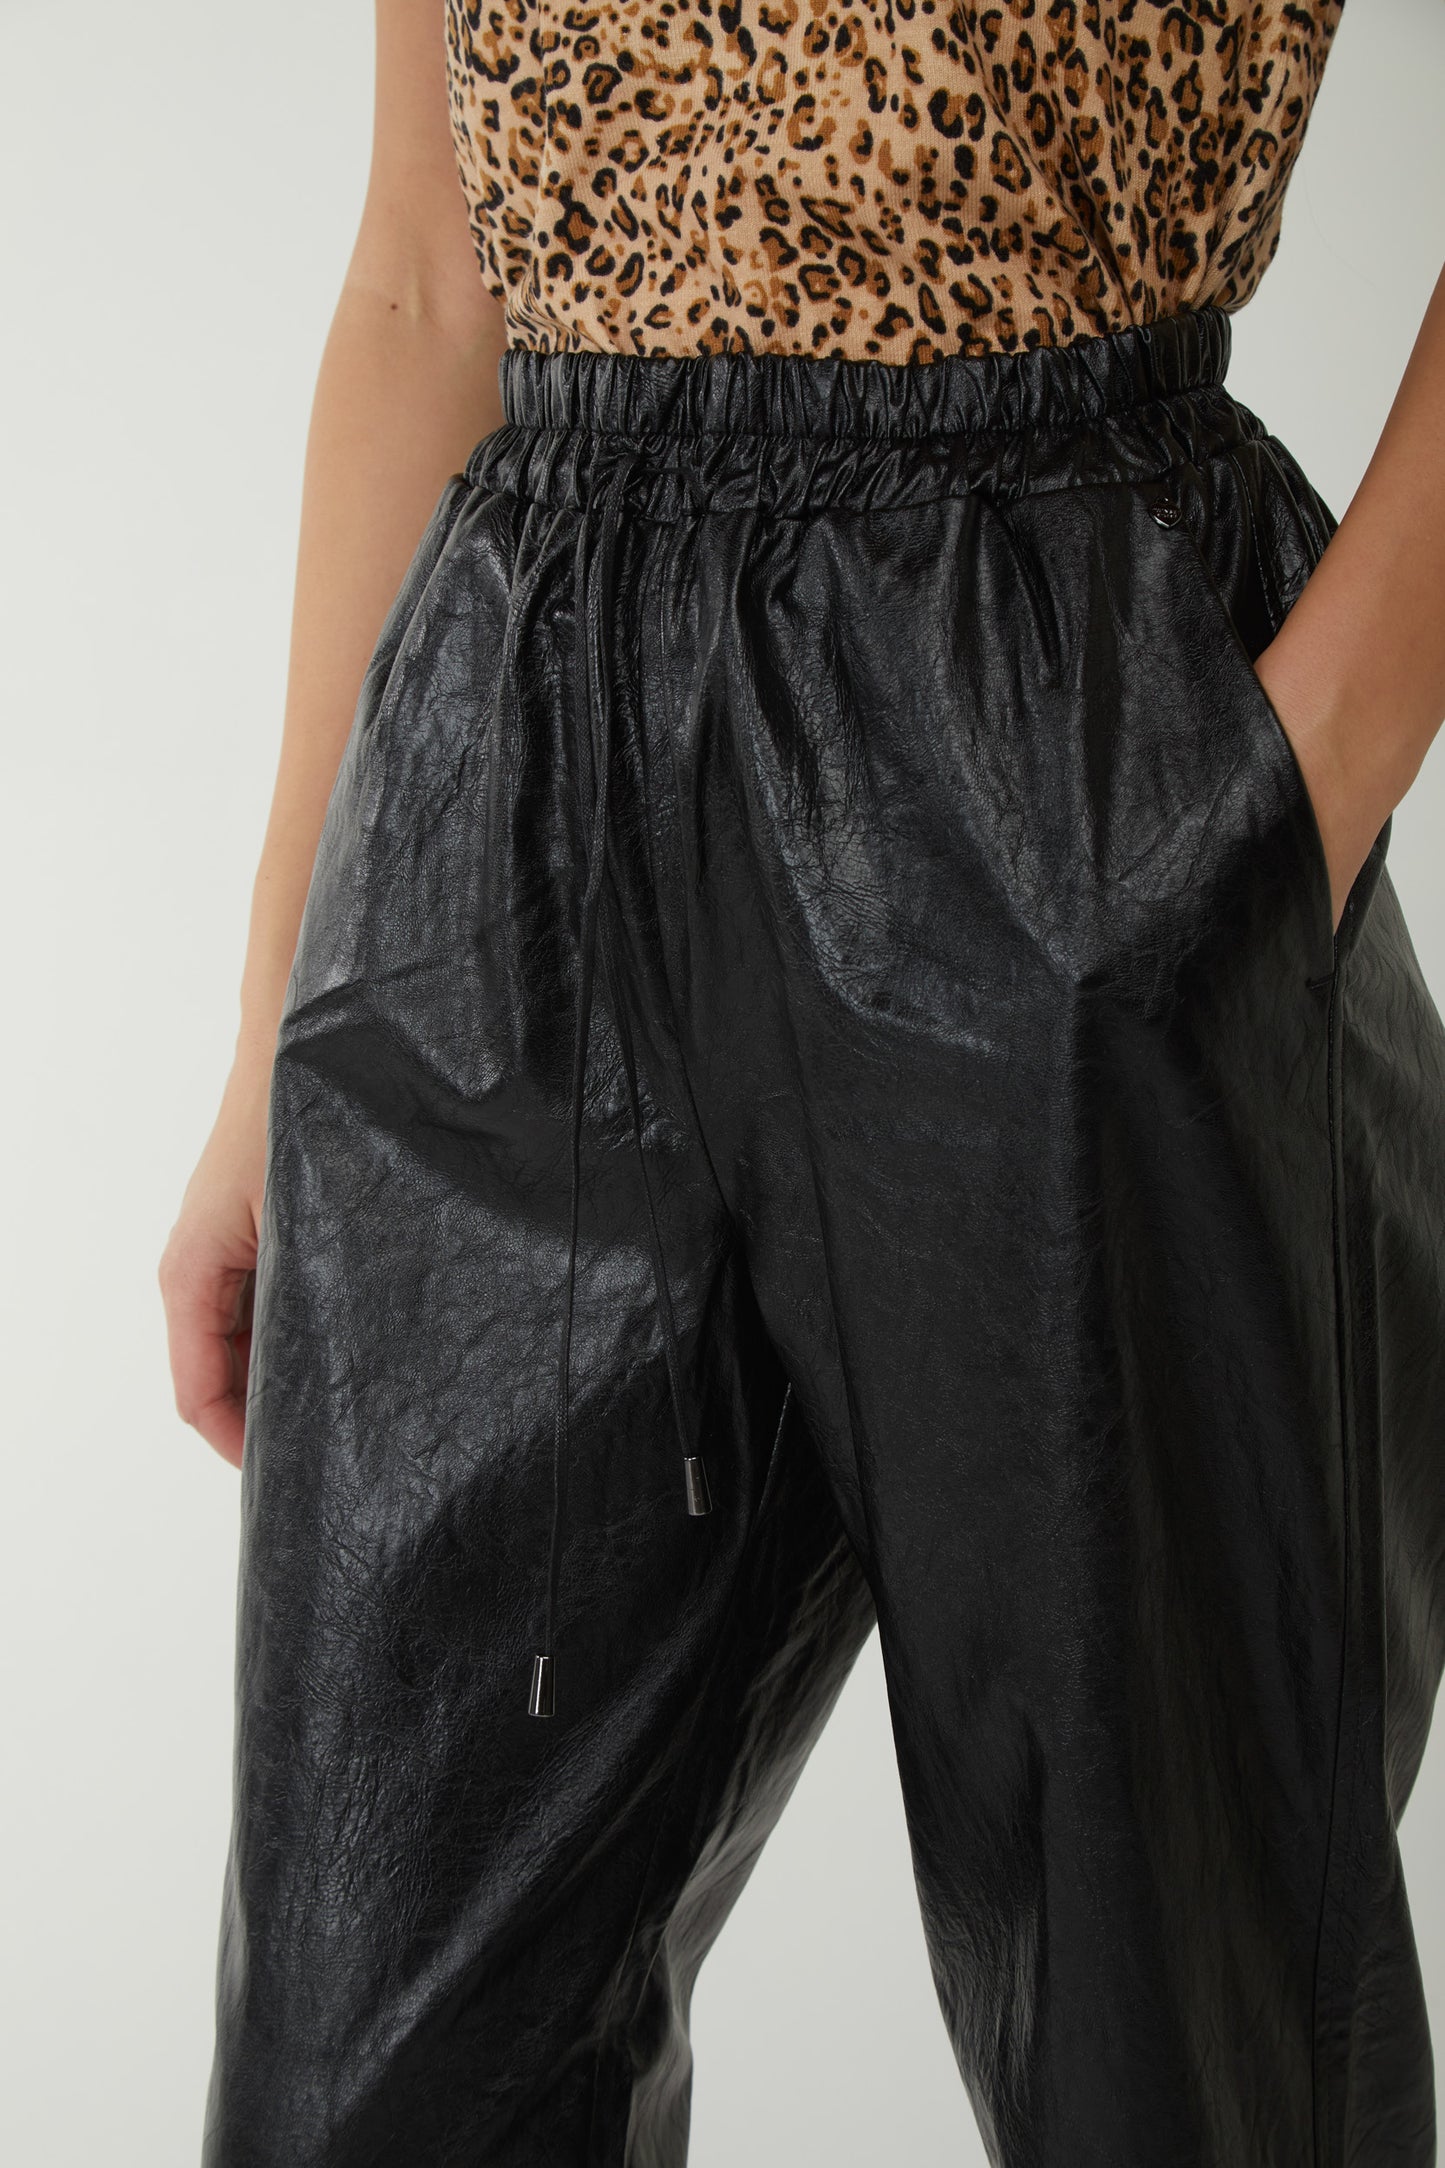 TWINSET Pants in Black Faux Leather